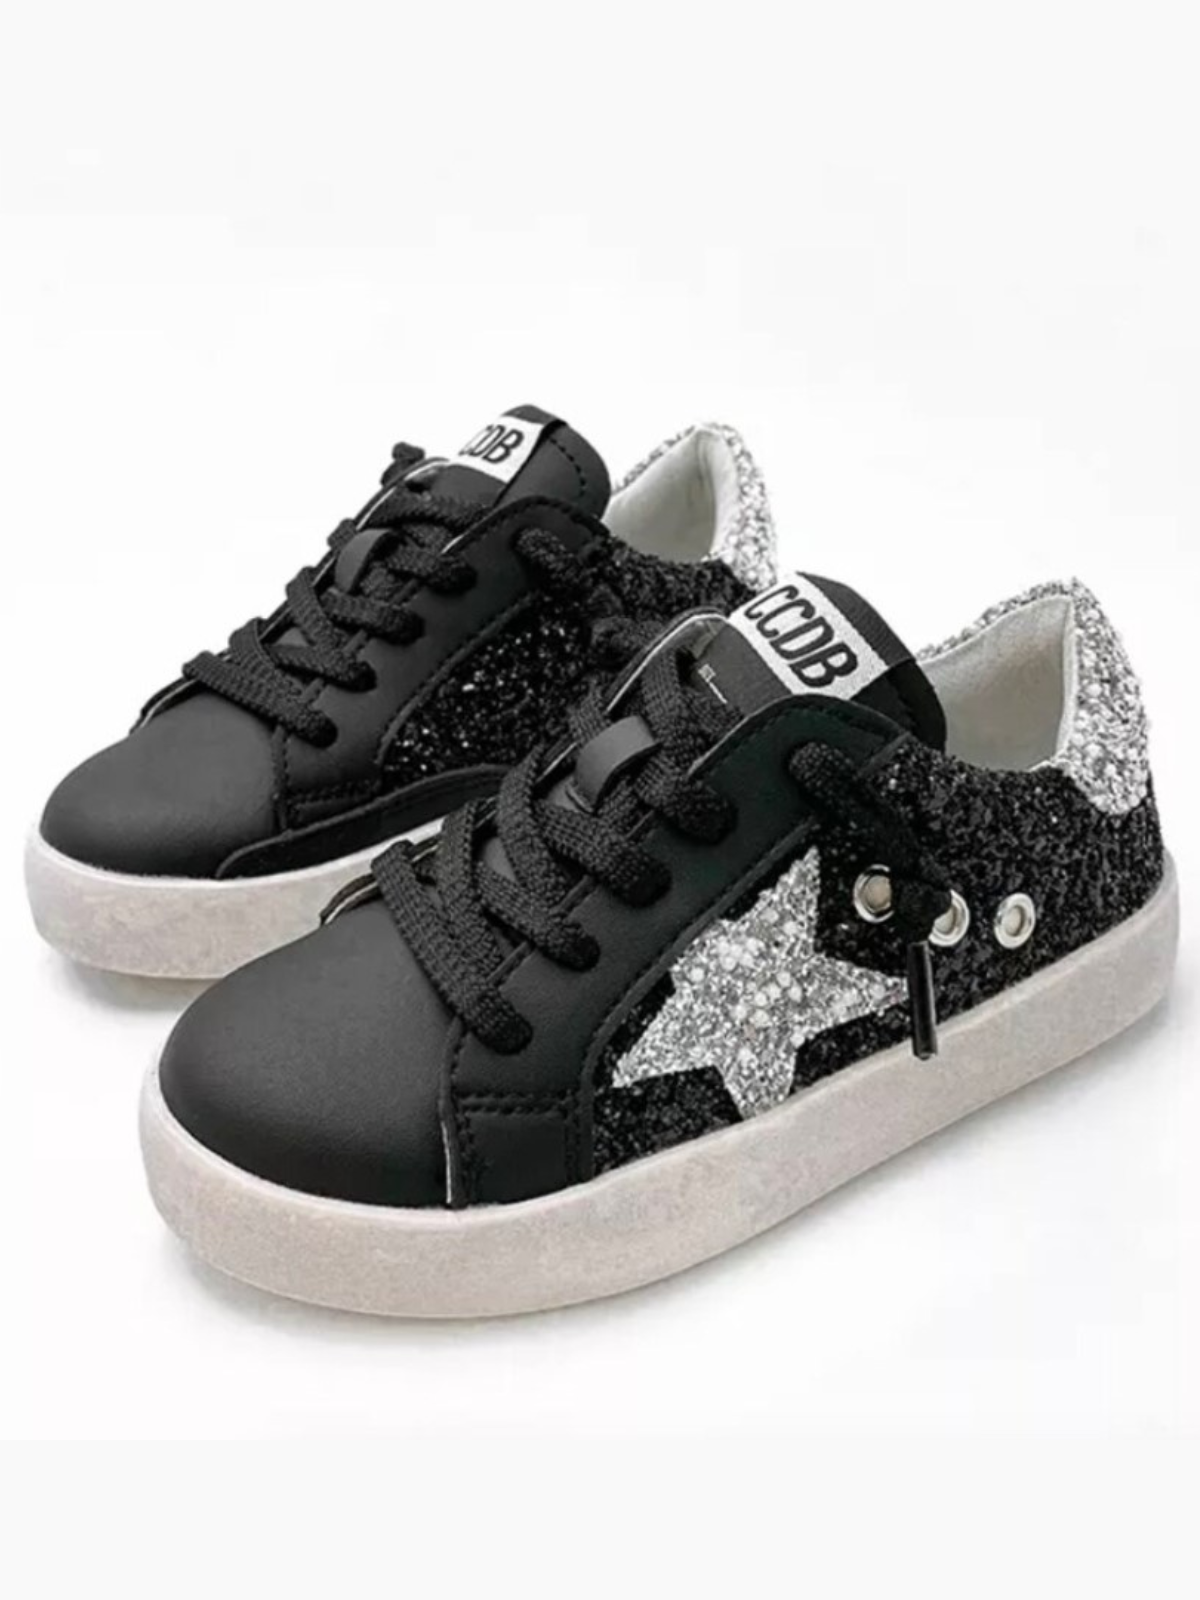 Back To School Shoes | Glitter Covered Sneakers | Mia Belle Girls